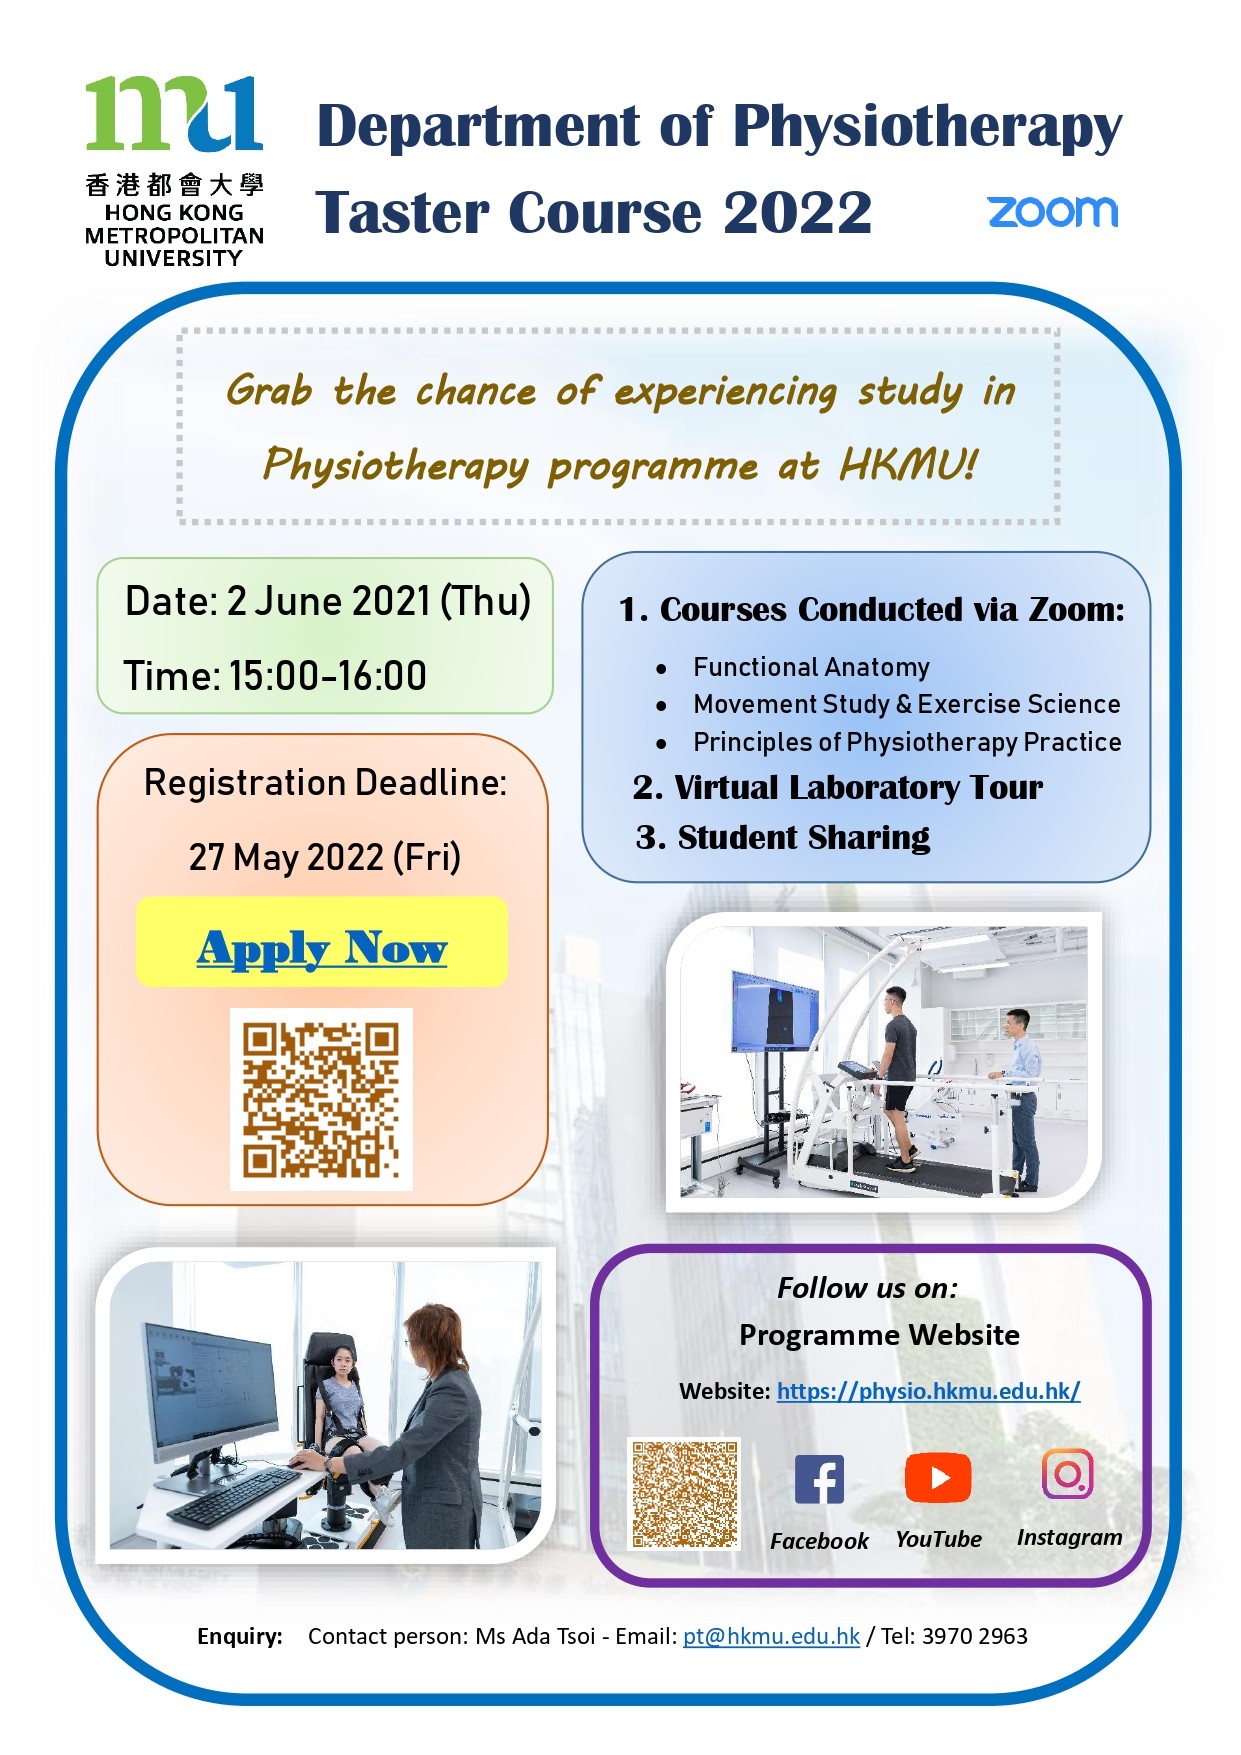 HKMU Physiotherapy Online Taster Course 2022